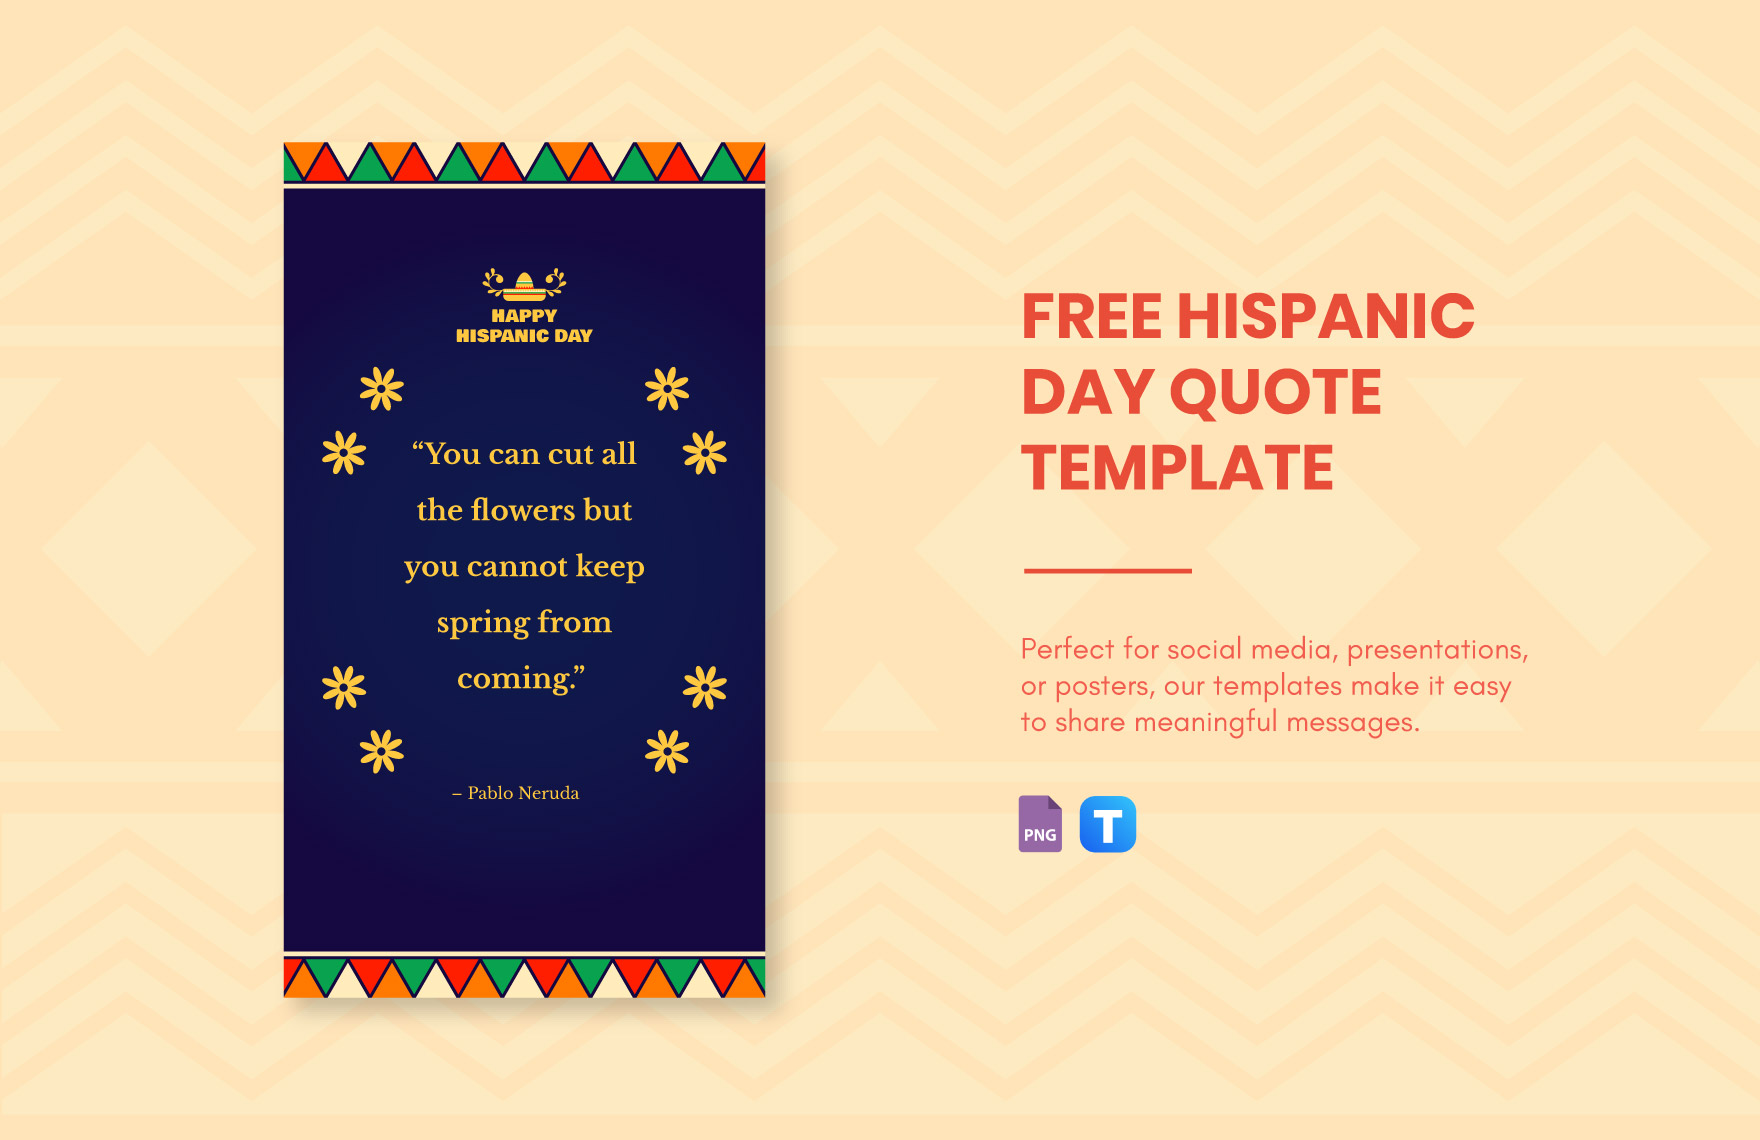 Free Hispanic Day Quote in PNG